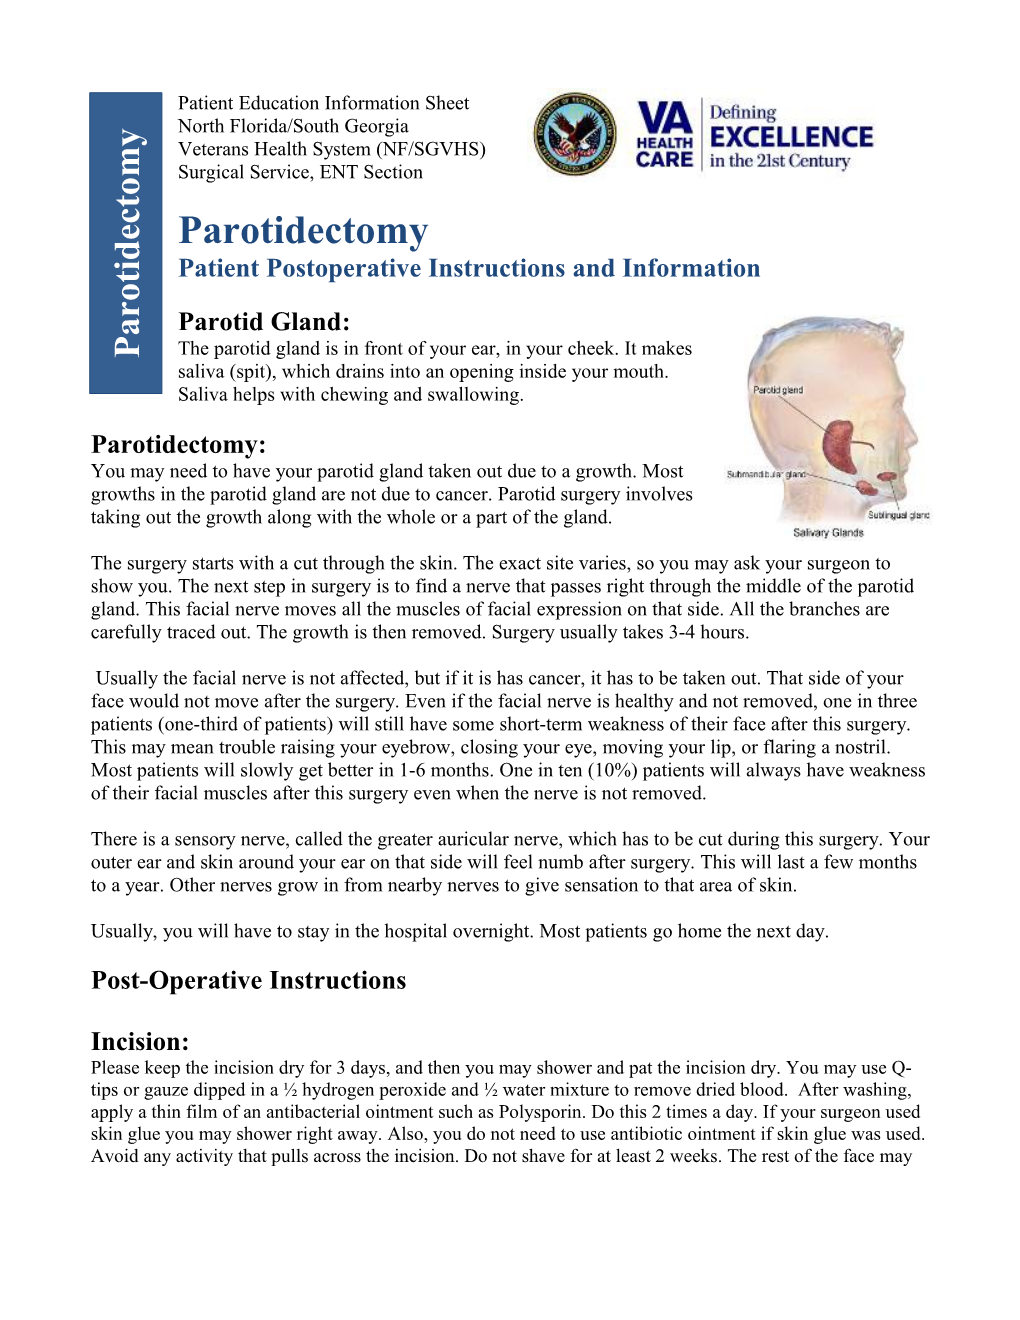 Parotidectomy: Patient Postoperative Instructions and Information